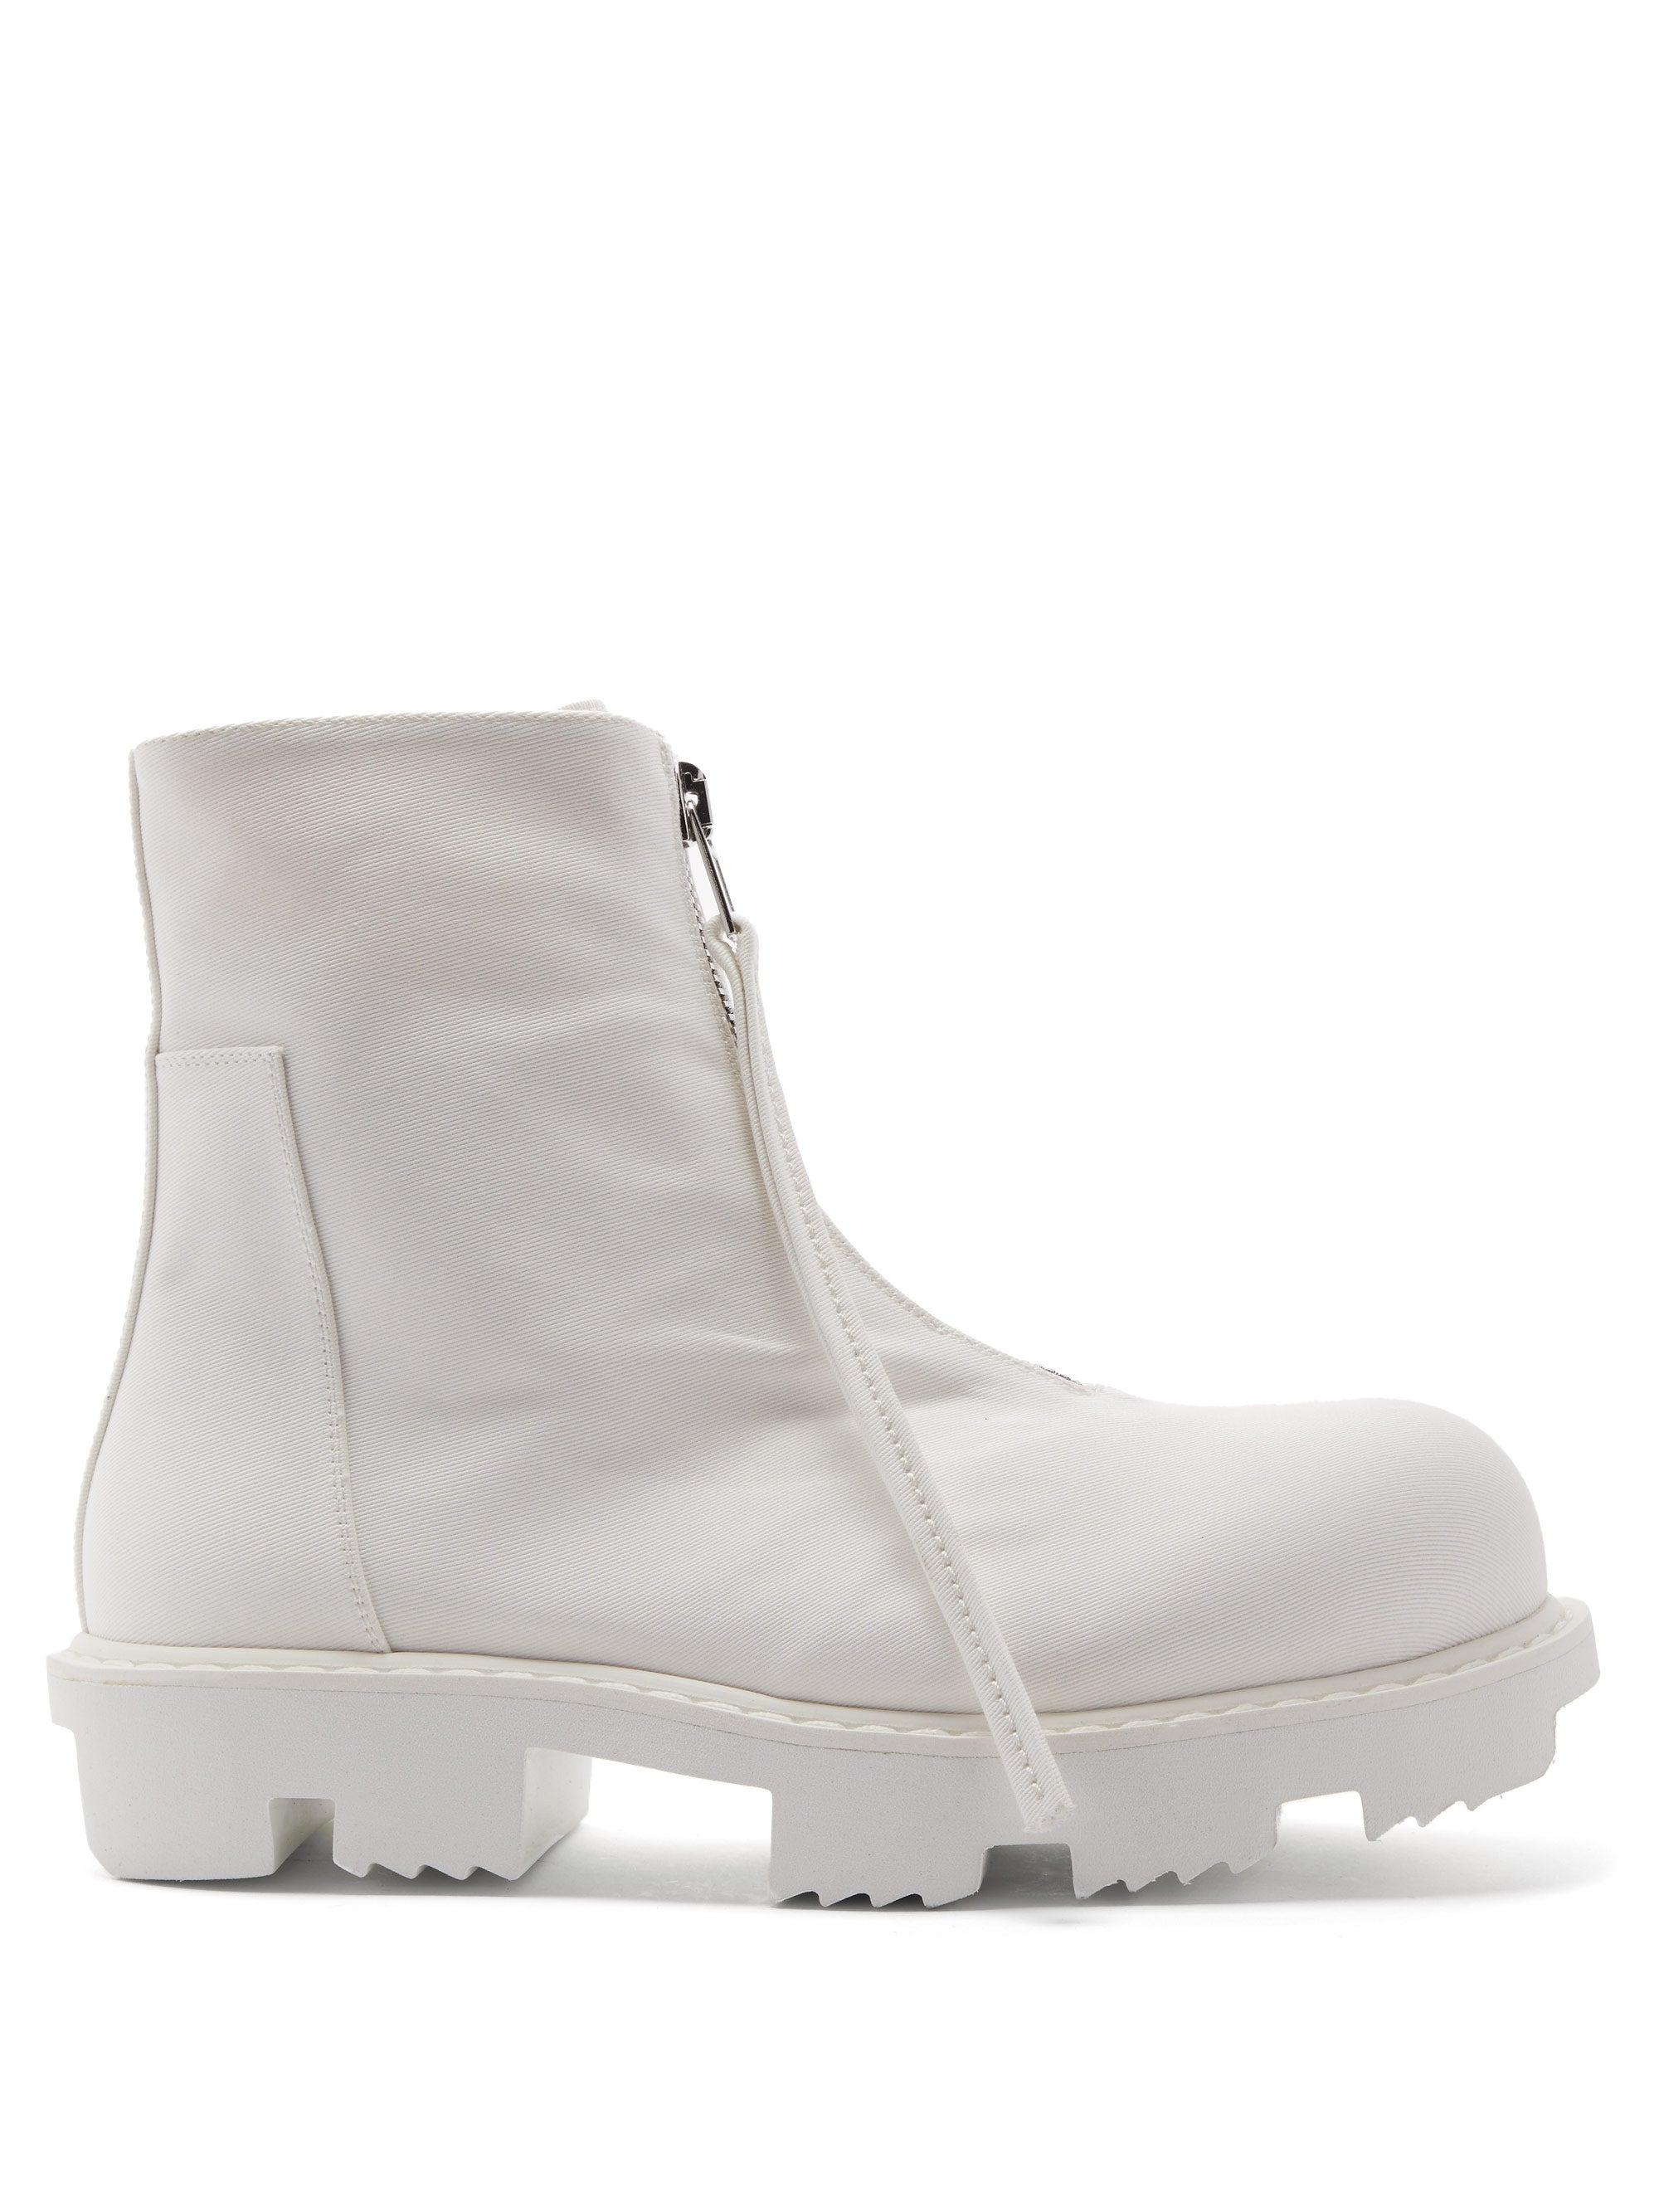 Rick Owens DRKSHDW Megatooth Zipped Canvas High-top Boots in White for Men  | Lyst